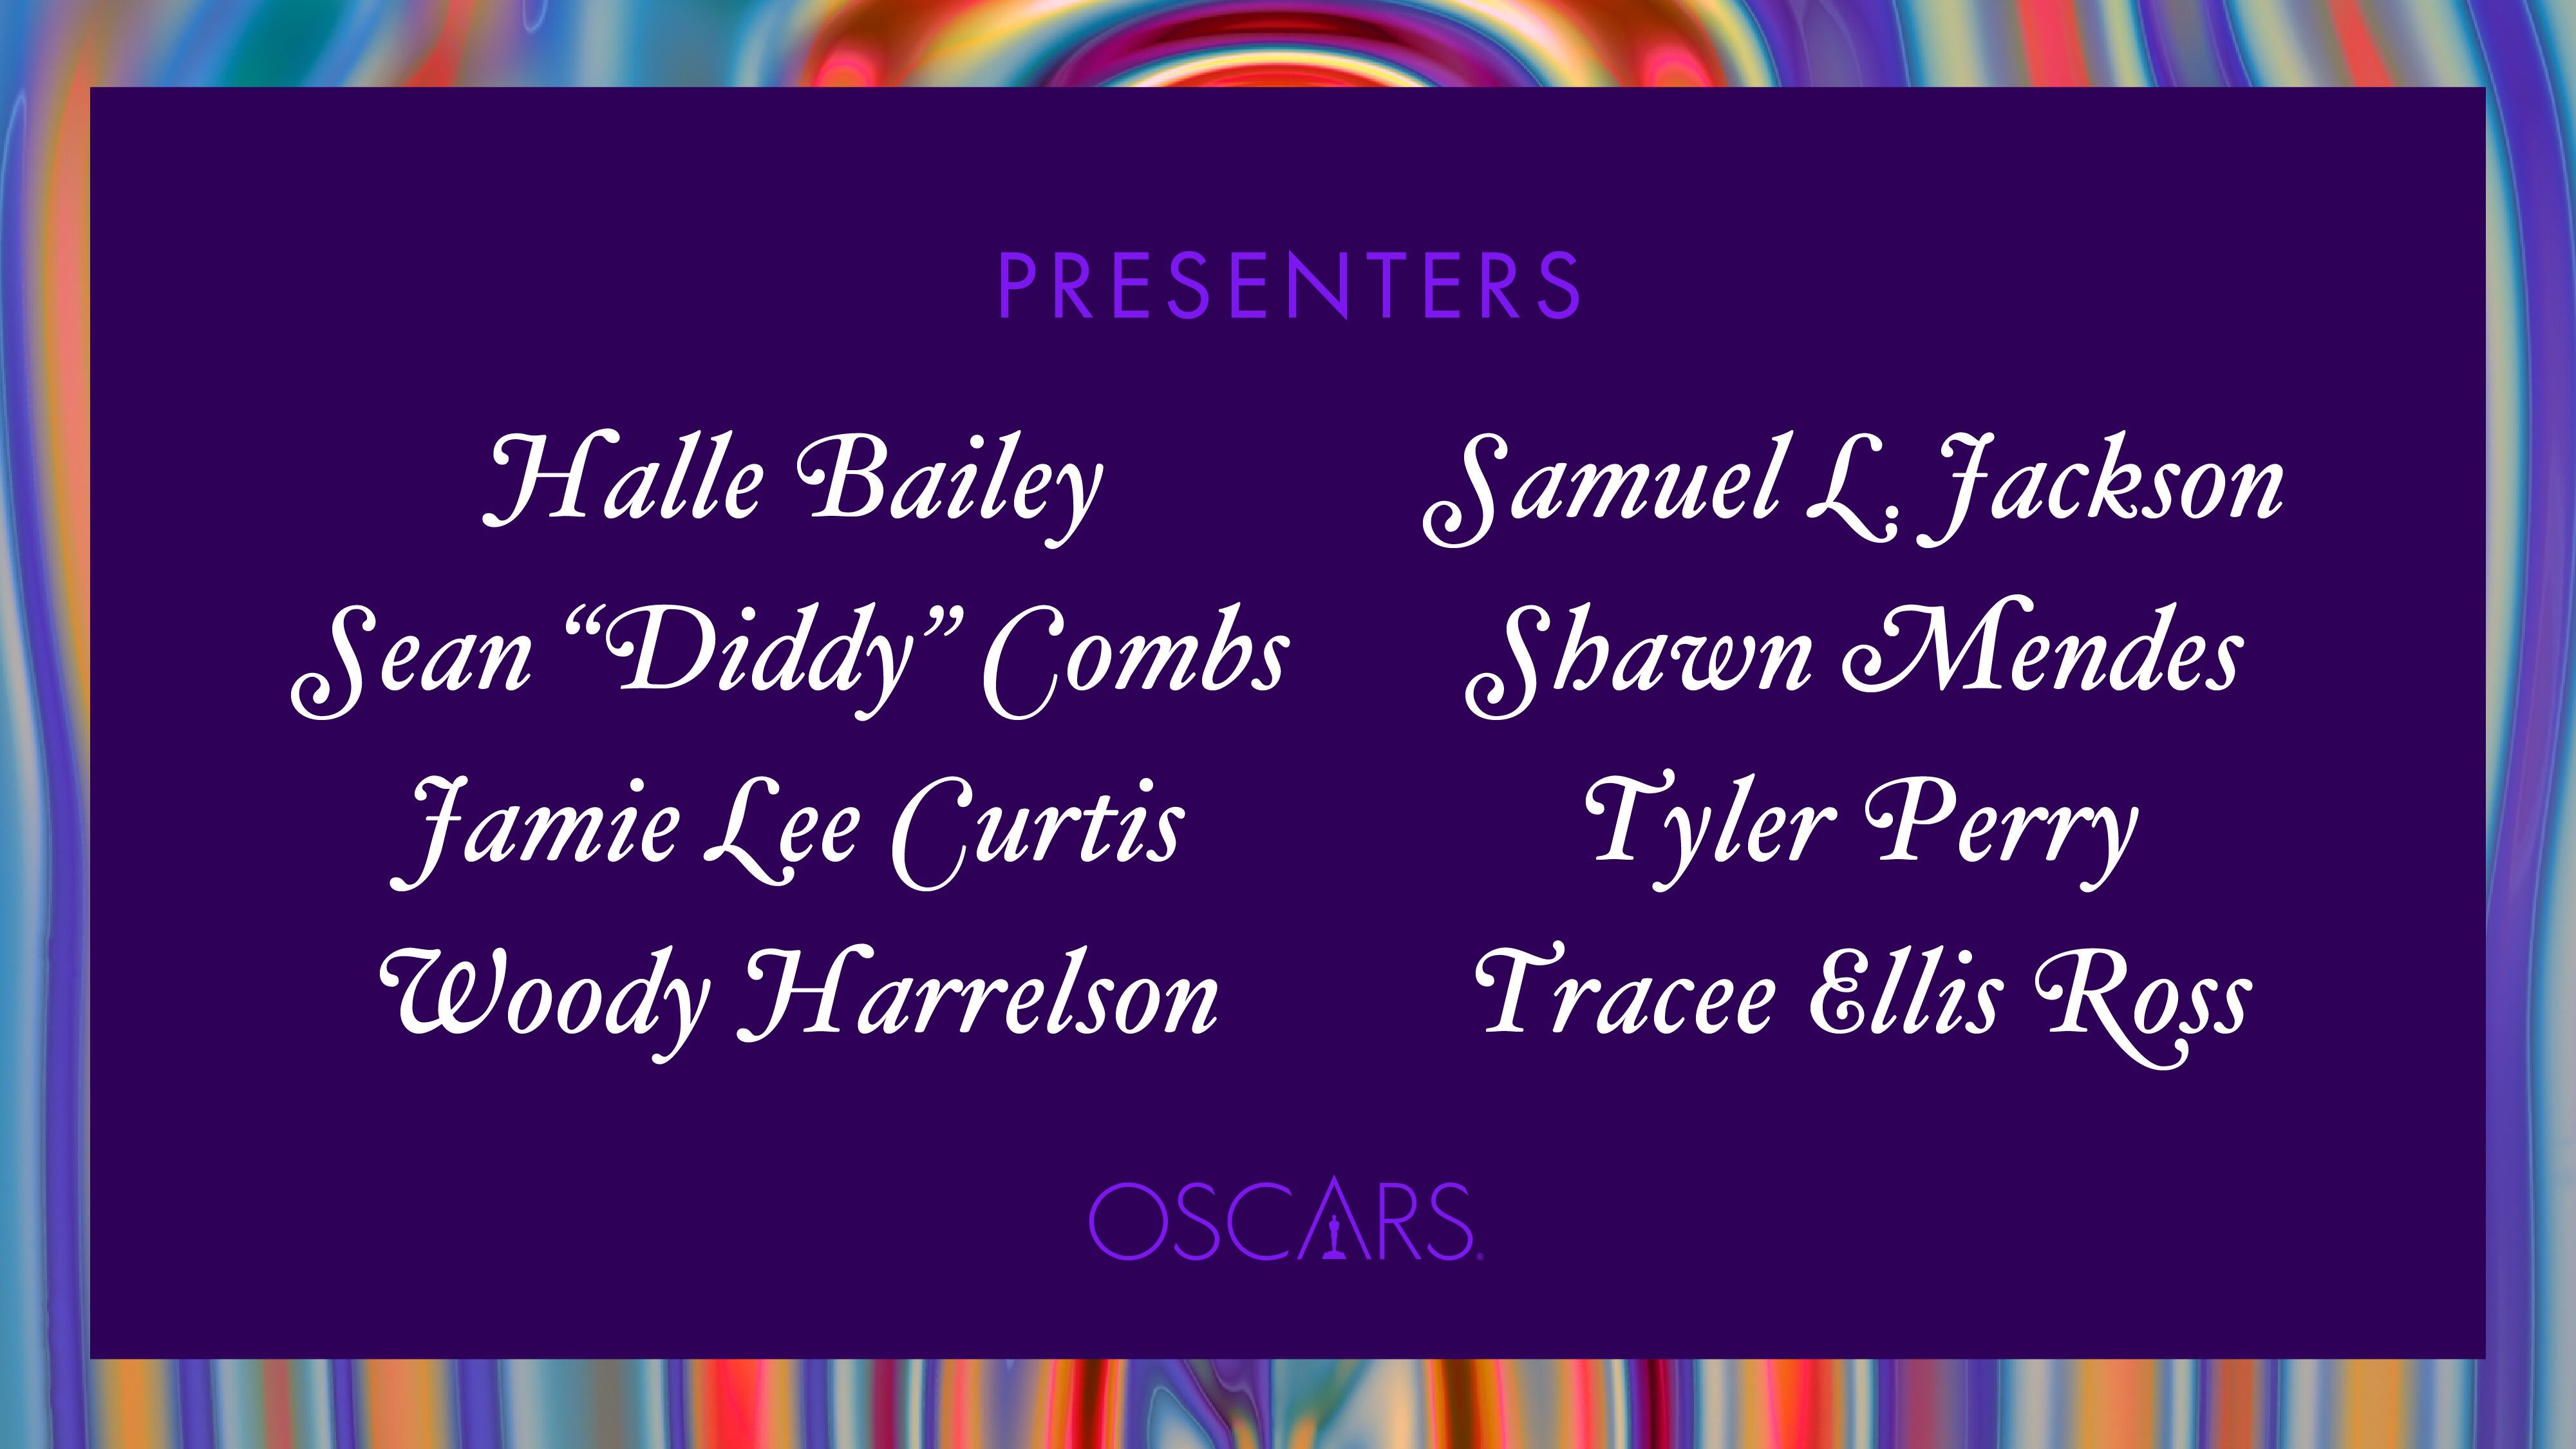 94TH OSCARS ADDS MORE TALENT TO PRESENT: HALLE BAILEY, SEAN “DIDDY” COMBS, JAMIE LEE CURTIS,  WOODY HARRELSON, SAMUEL L. JACKSON, SHAWN MENDES,  TYLER PERRY AND TRACEE ELLIS ROSS